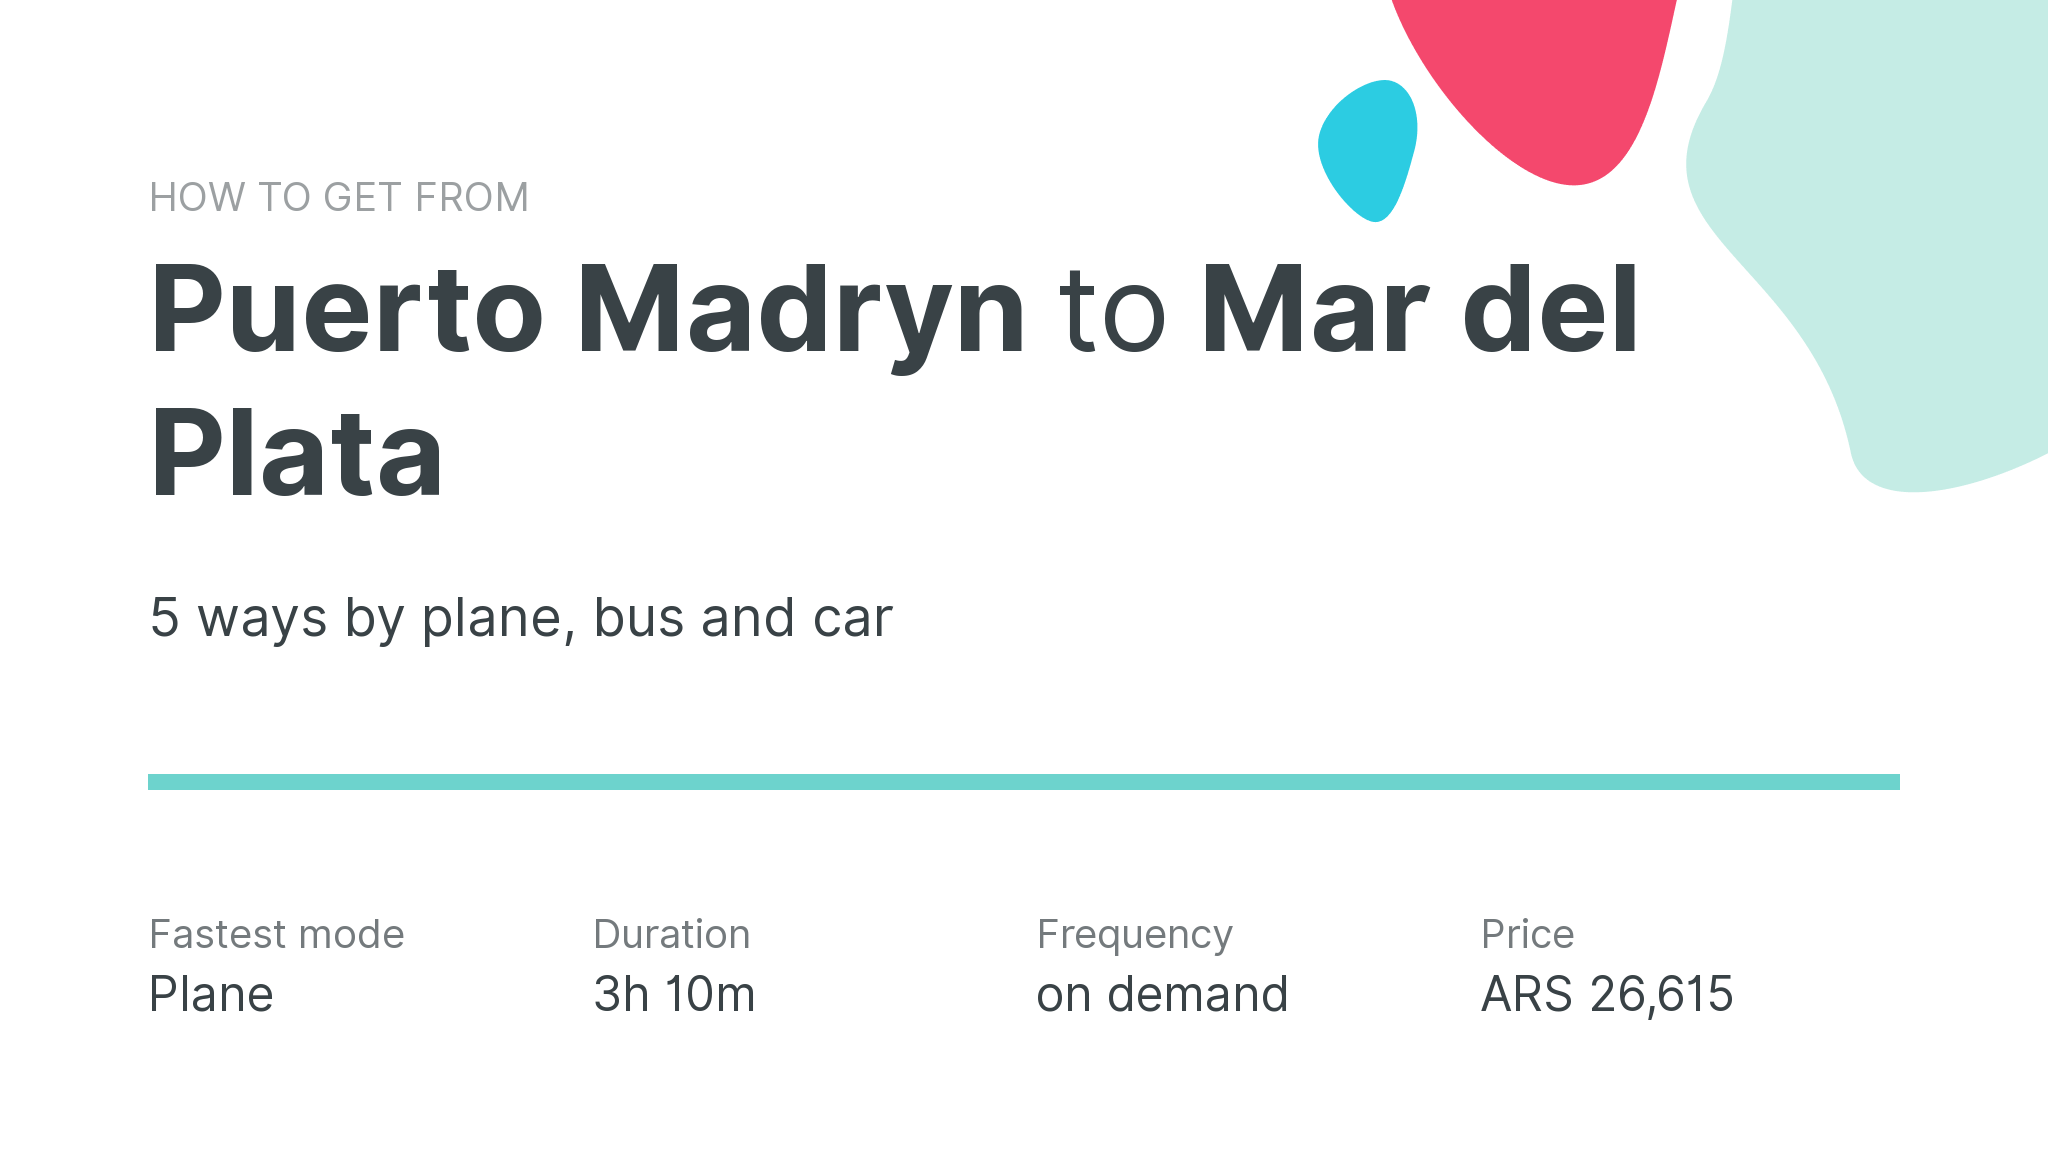 How do I get from Puerto Madryn to Mar del Plata